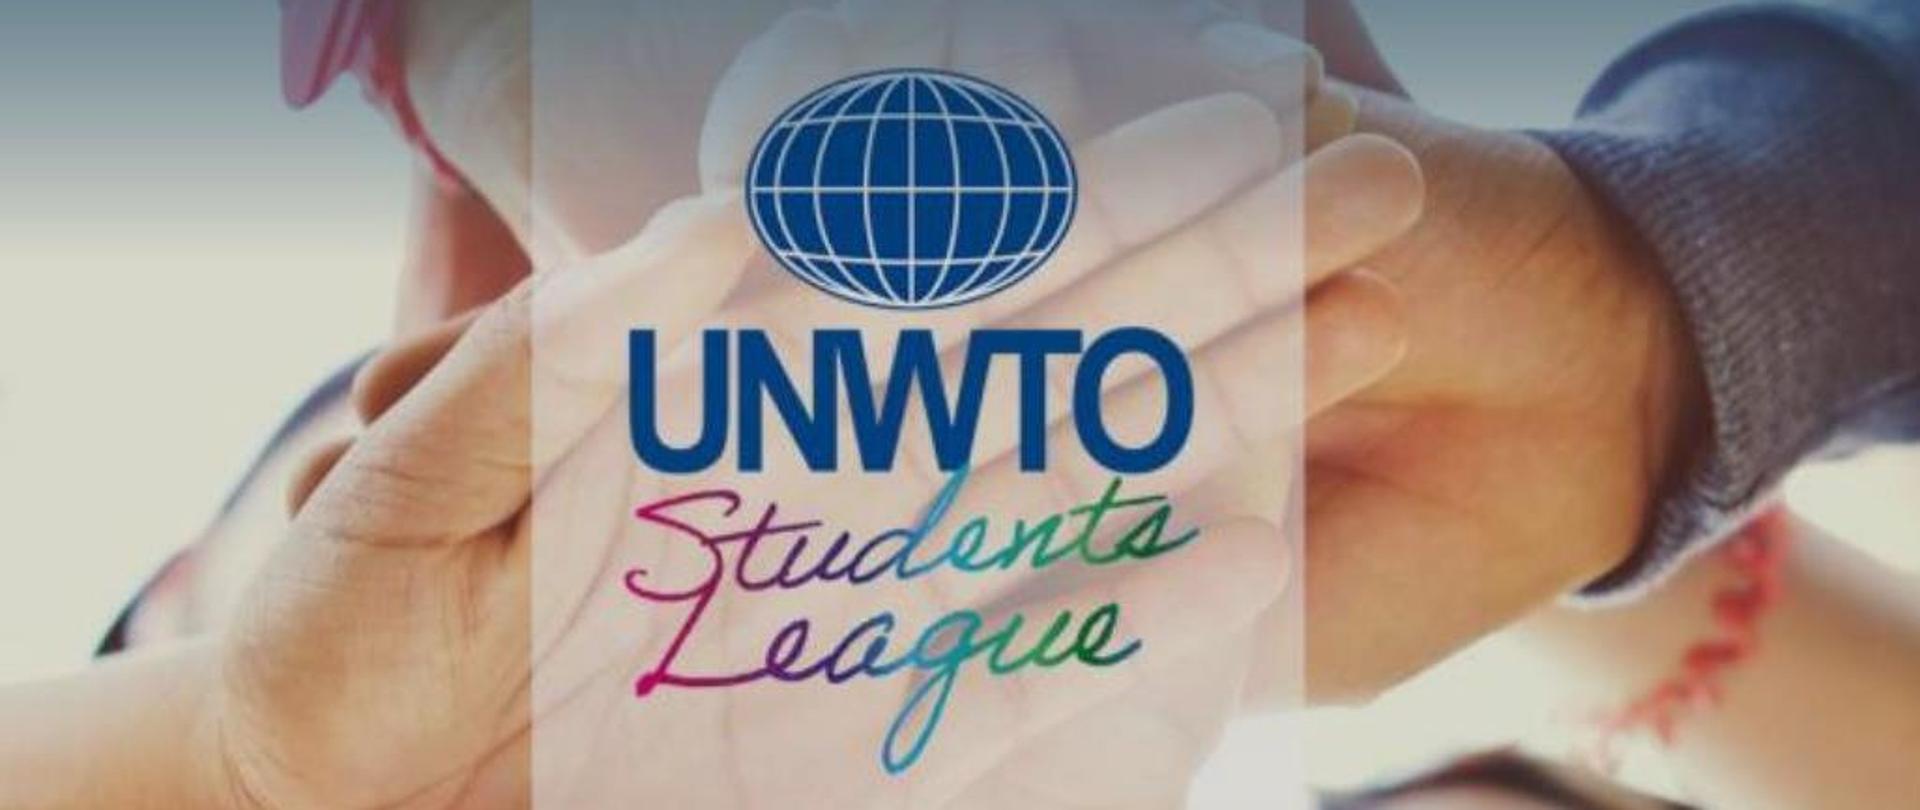 UNWTO Students League